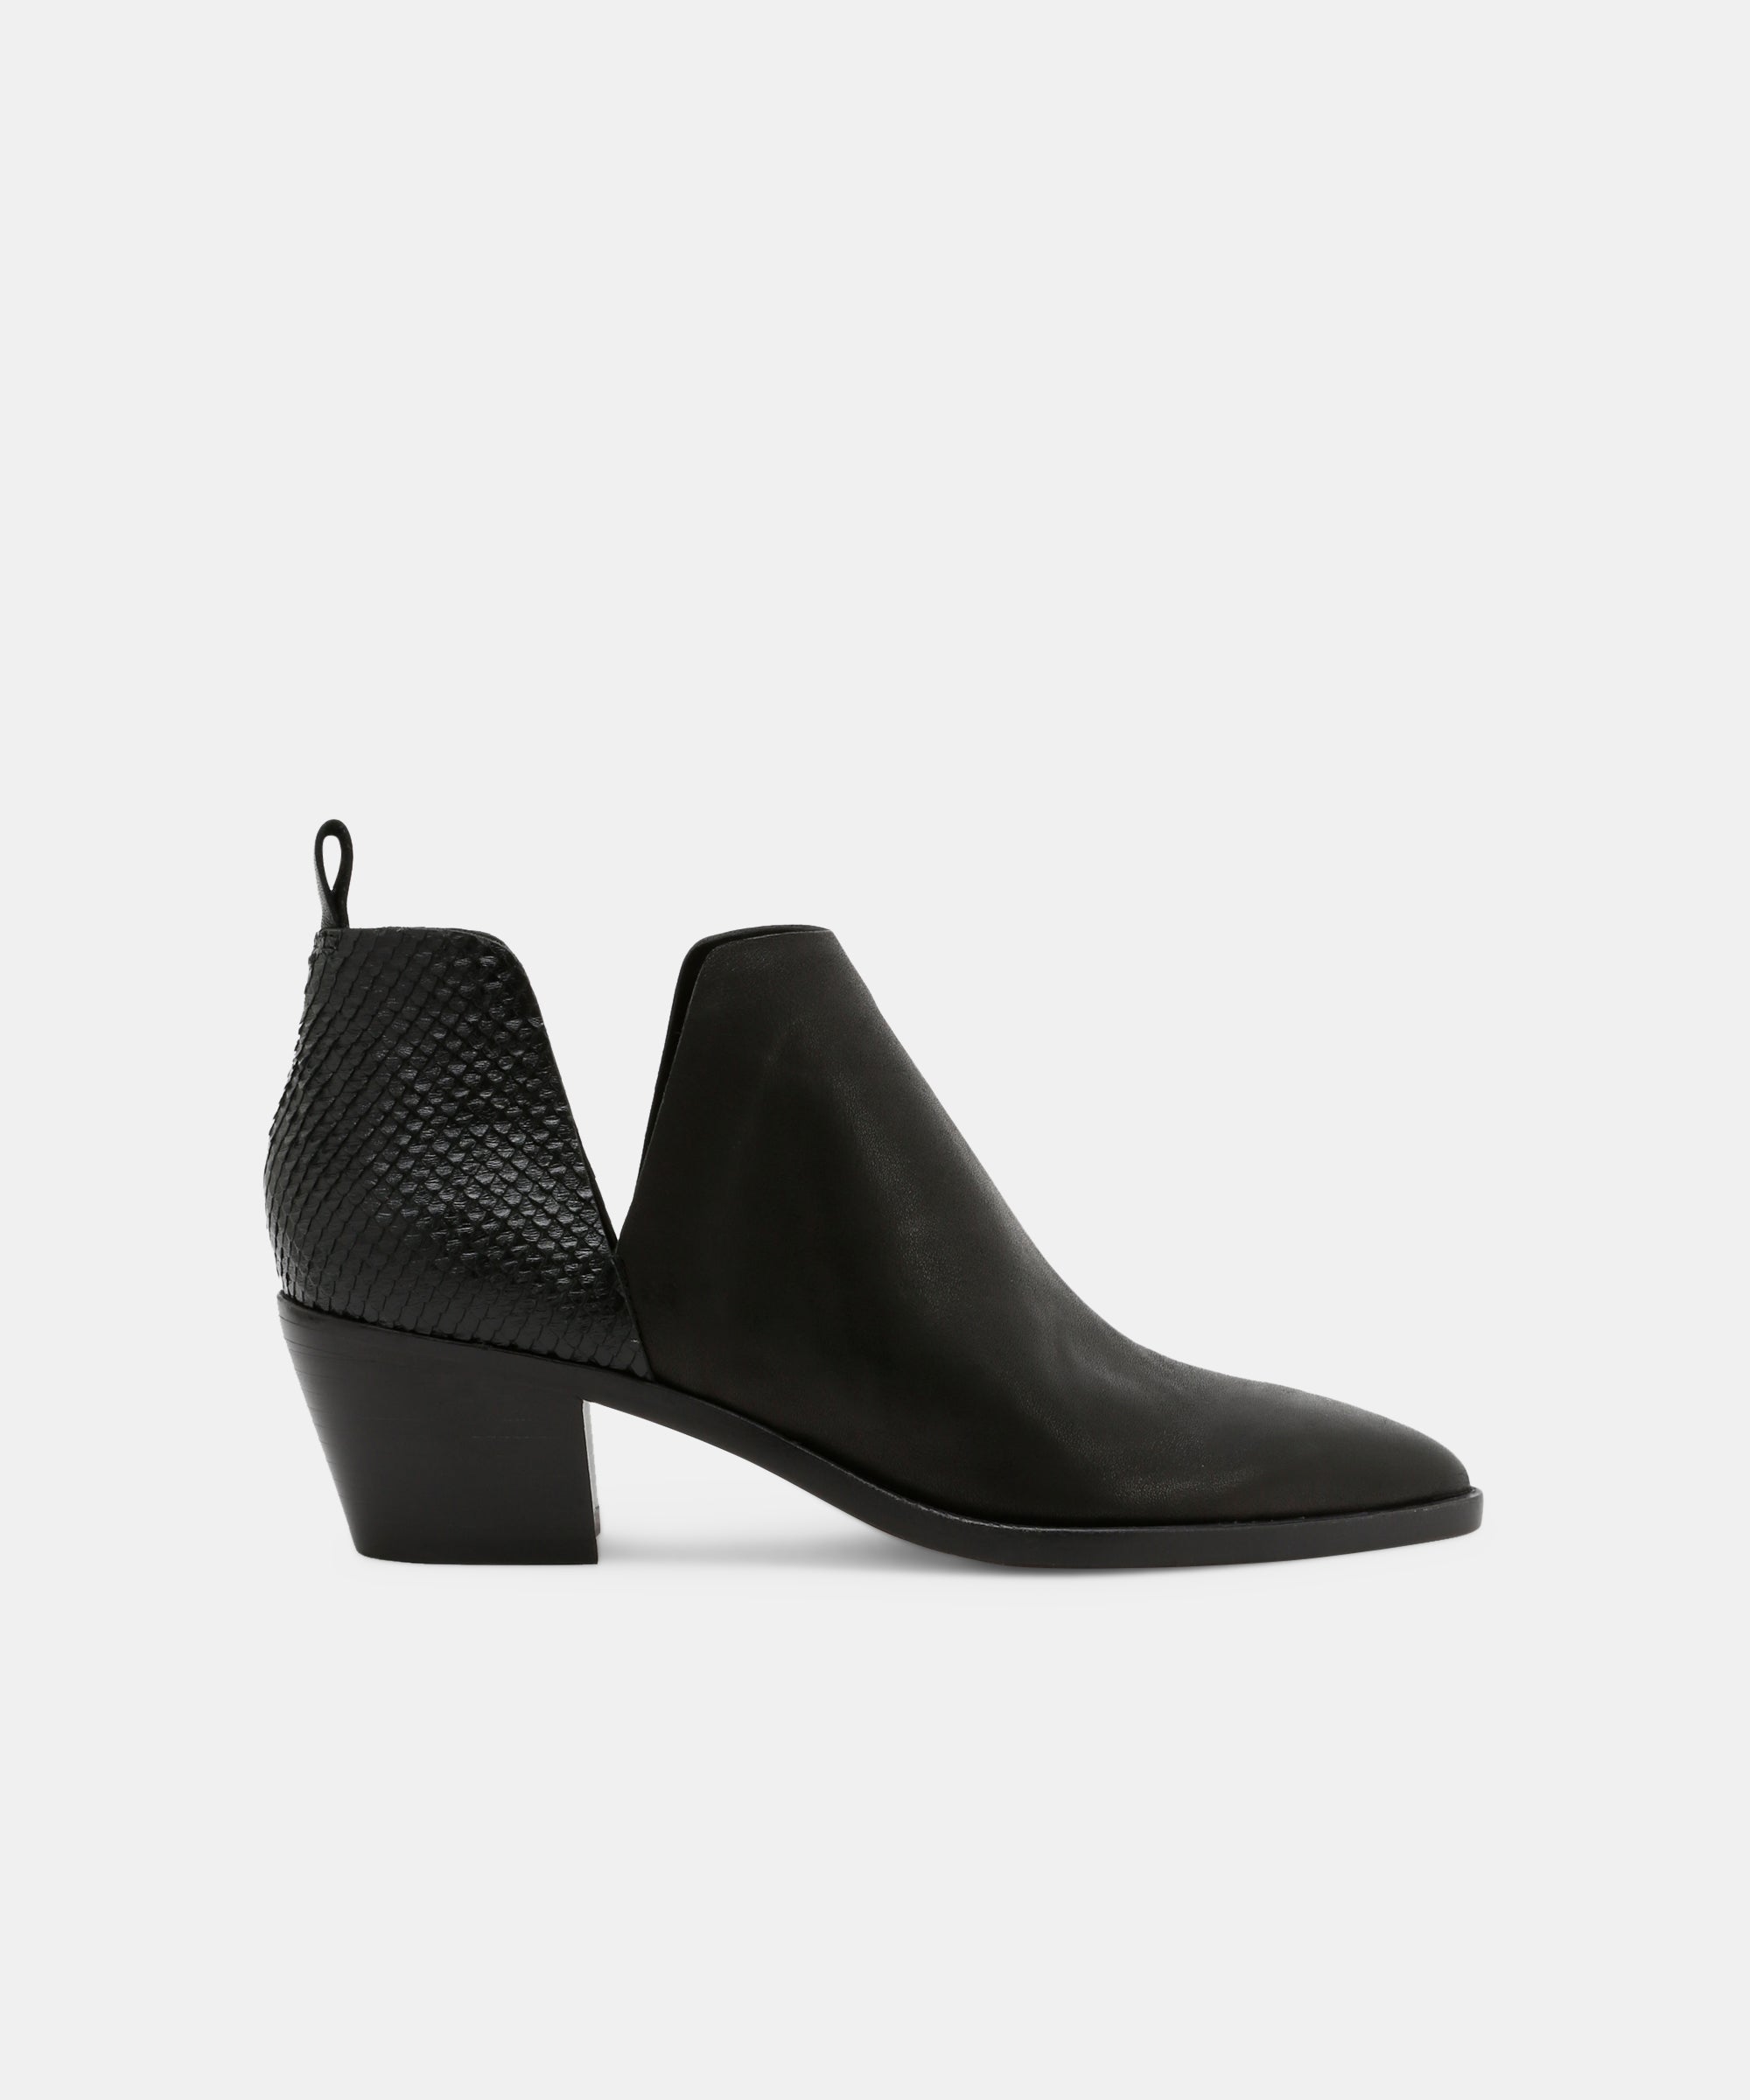 dolce vita shoes booties